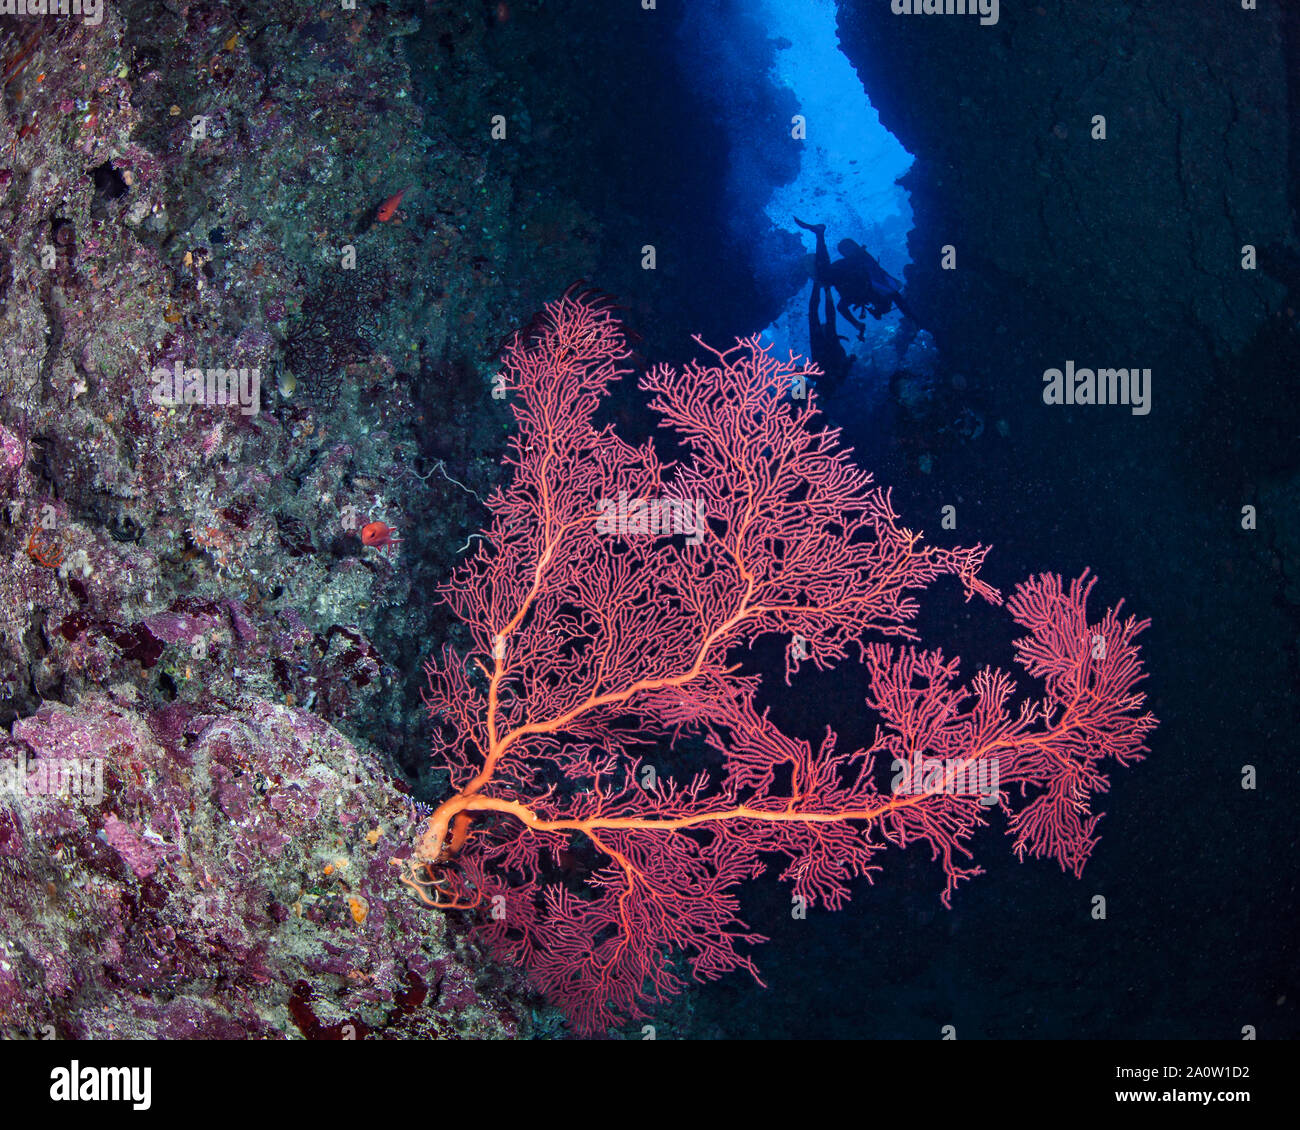 Red seafan heralds the entrance to a crevice in an undersea wall. Scuba divers explore the dark narrow channel. Beqa Lagoon, Fiji Stock Photo